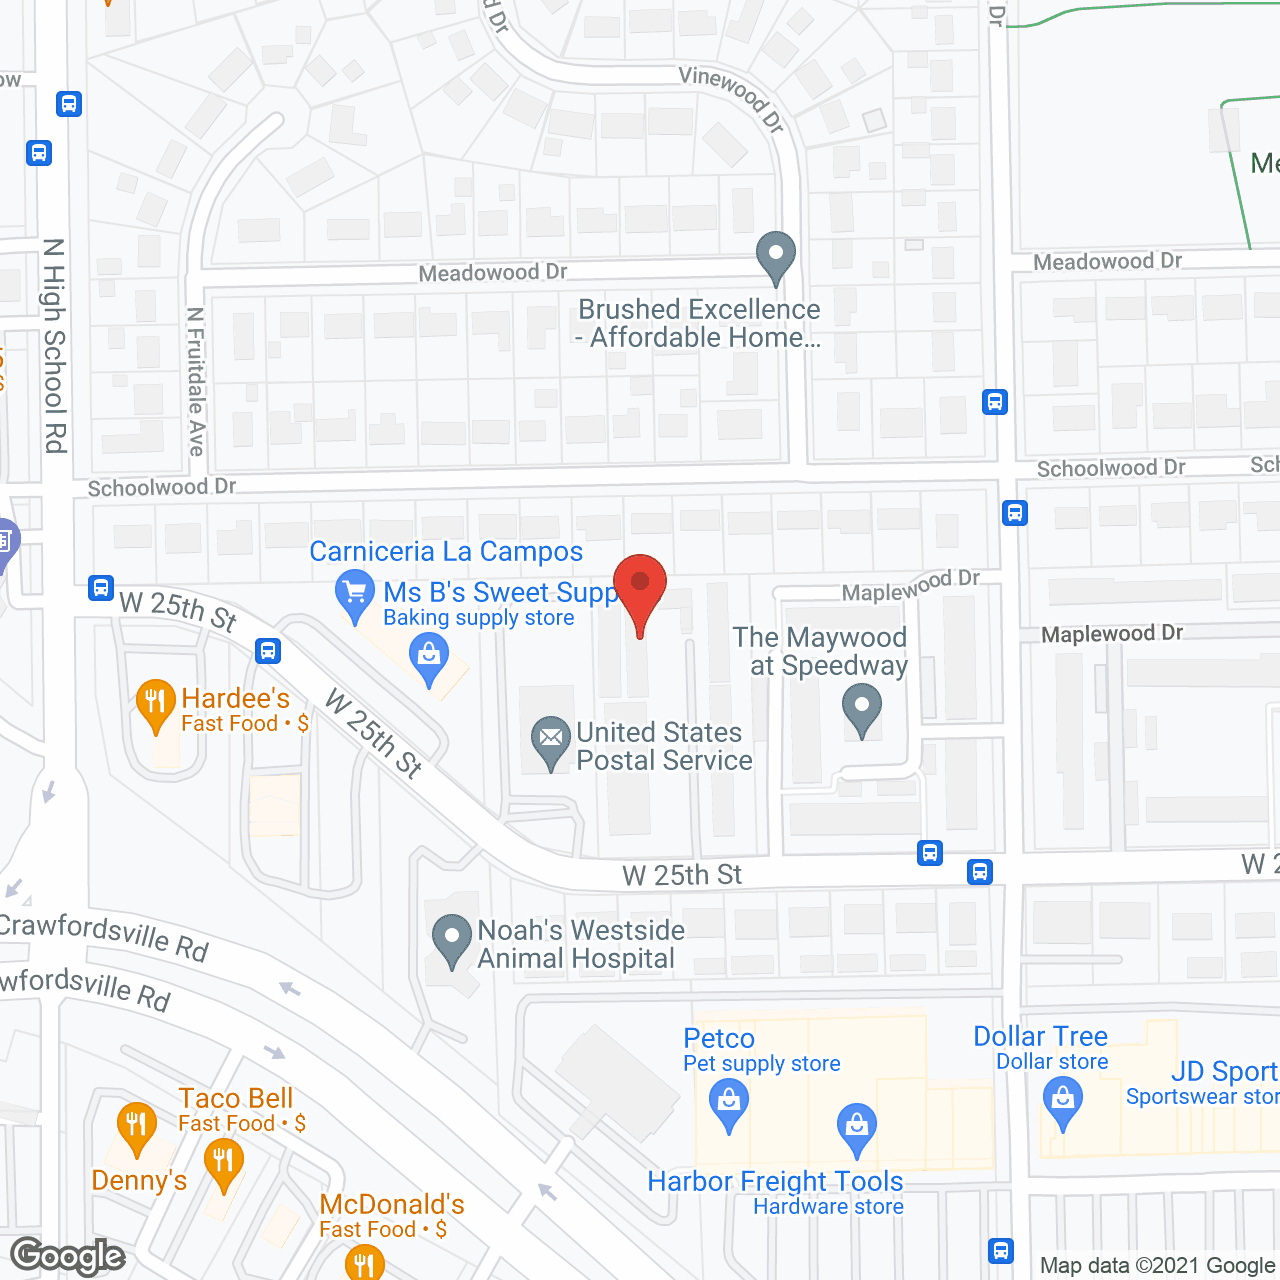 INDEPENDENT LIVING CLUB in google map